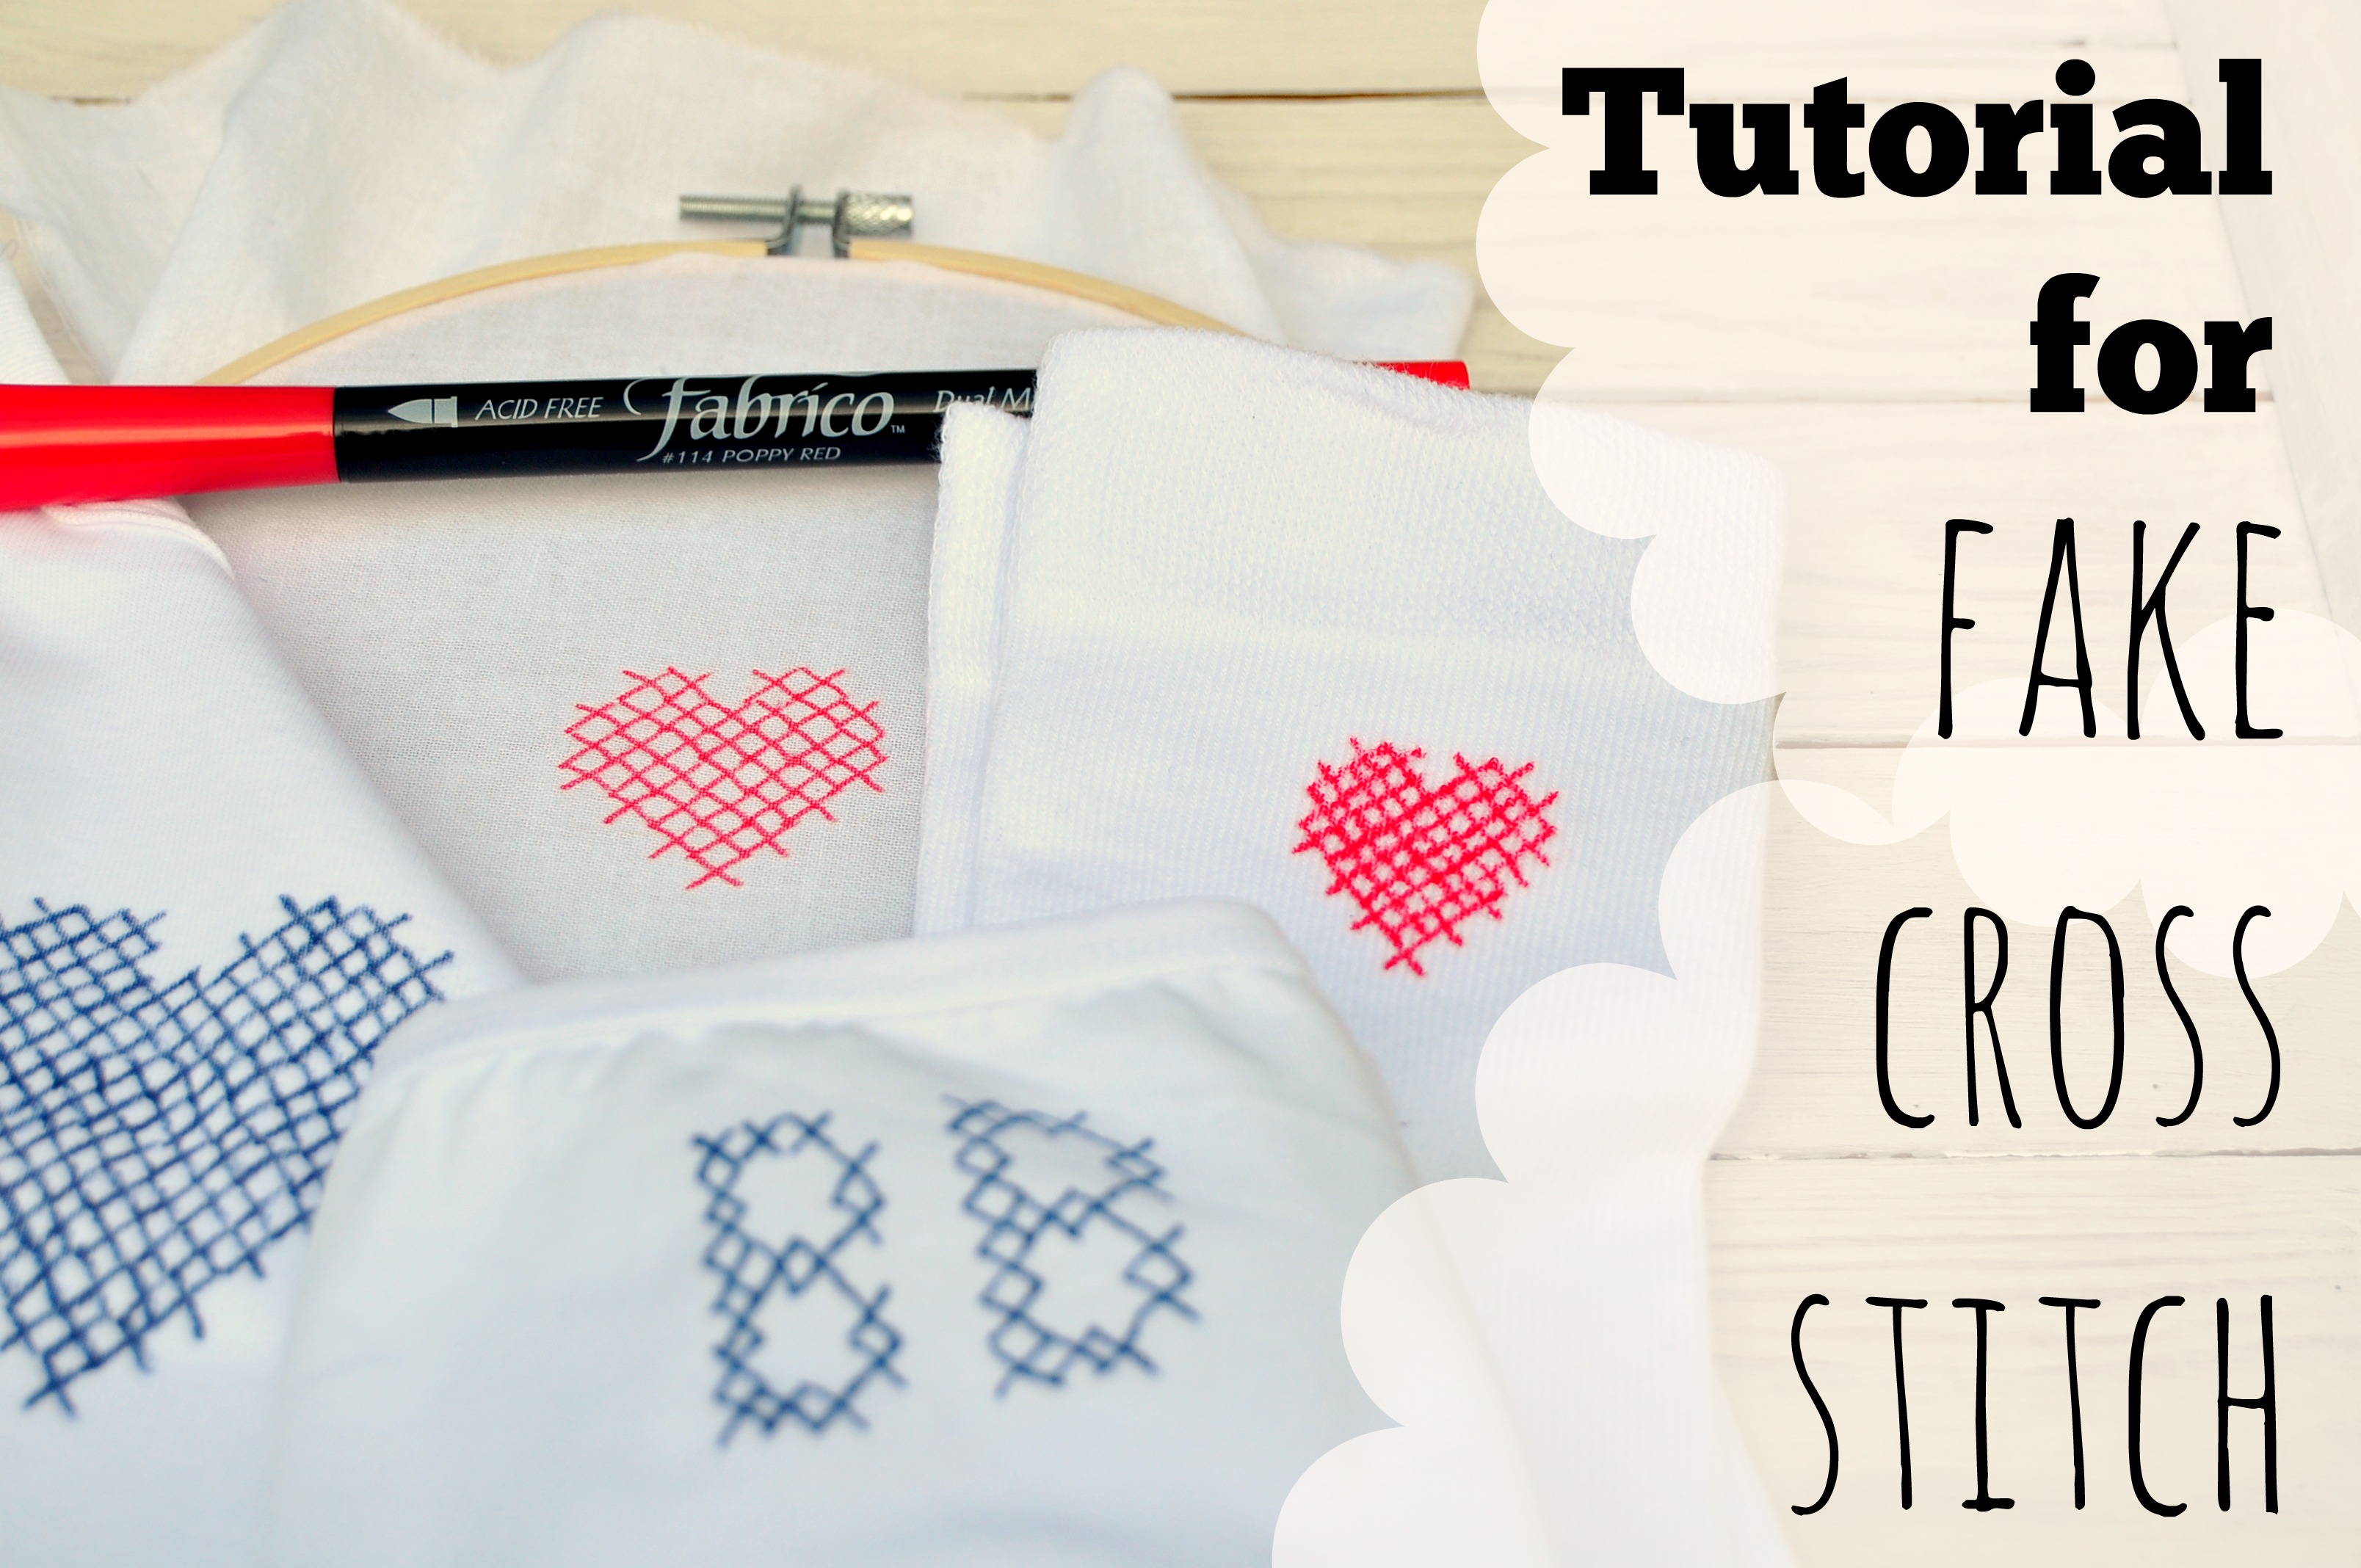 Faux Cross Stitch with Fabrico Markers